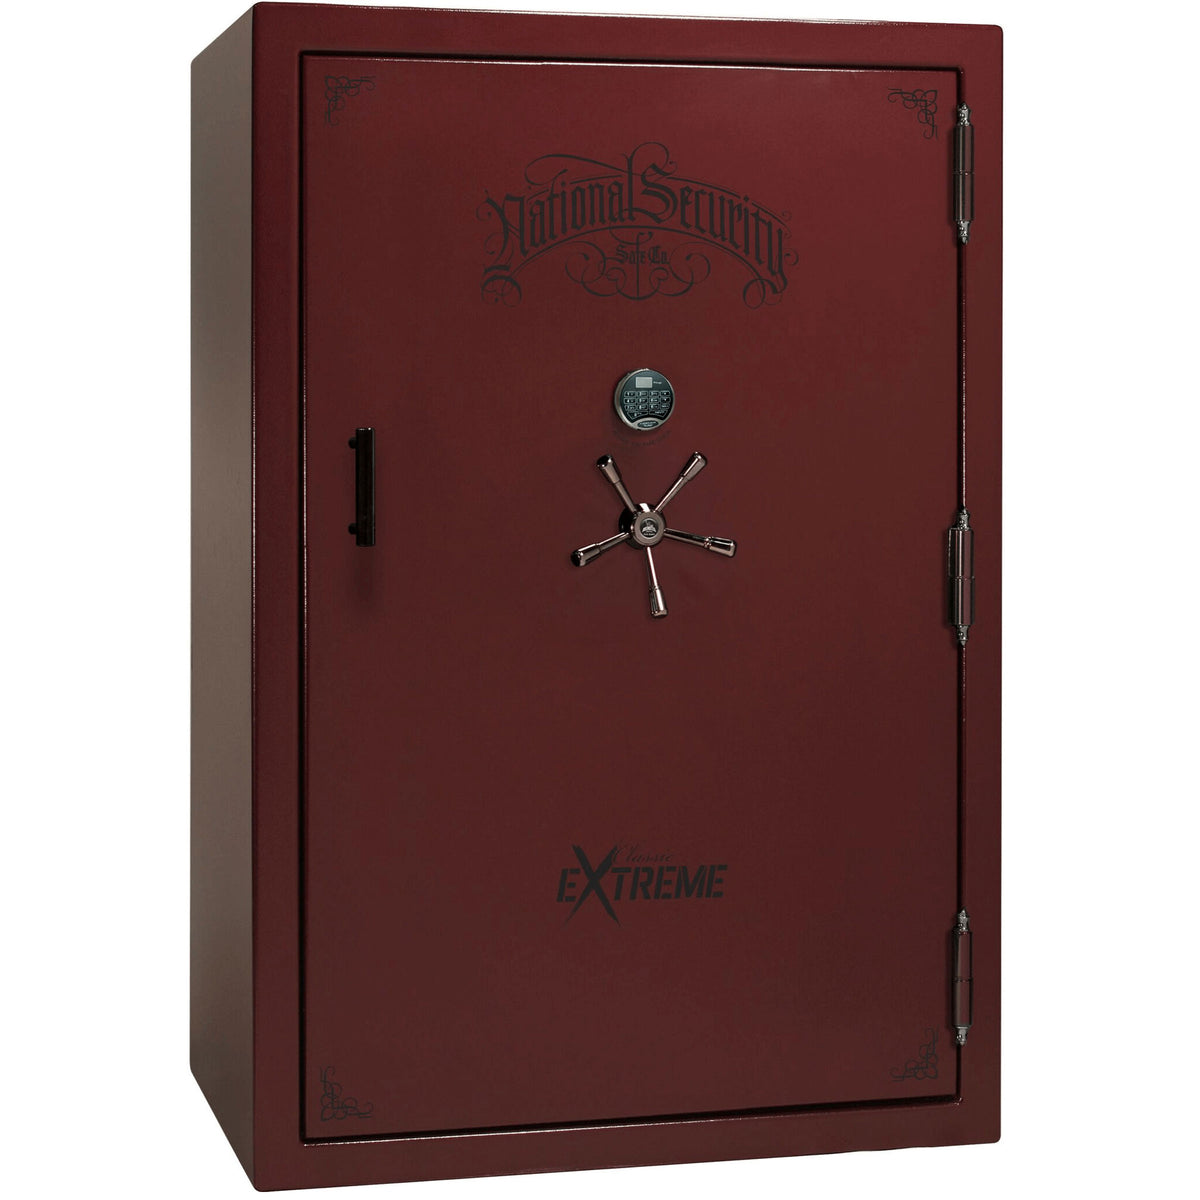 Liberty Classic Select Extreme Wide Body Safe in Burgundy Gloss with Black Chrome Electronic Lock.